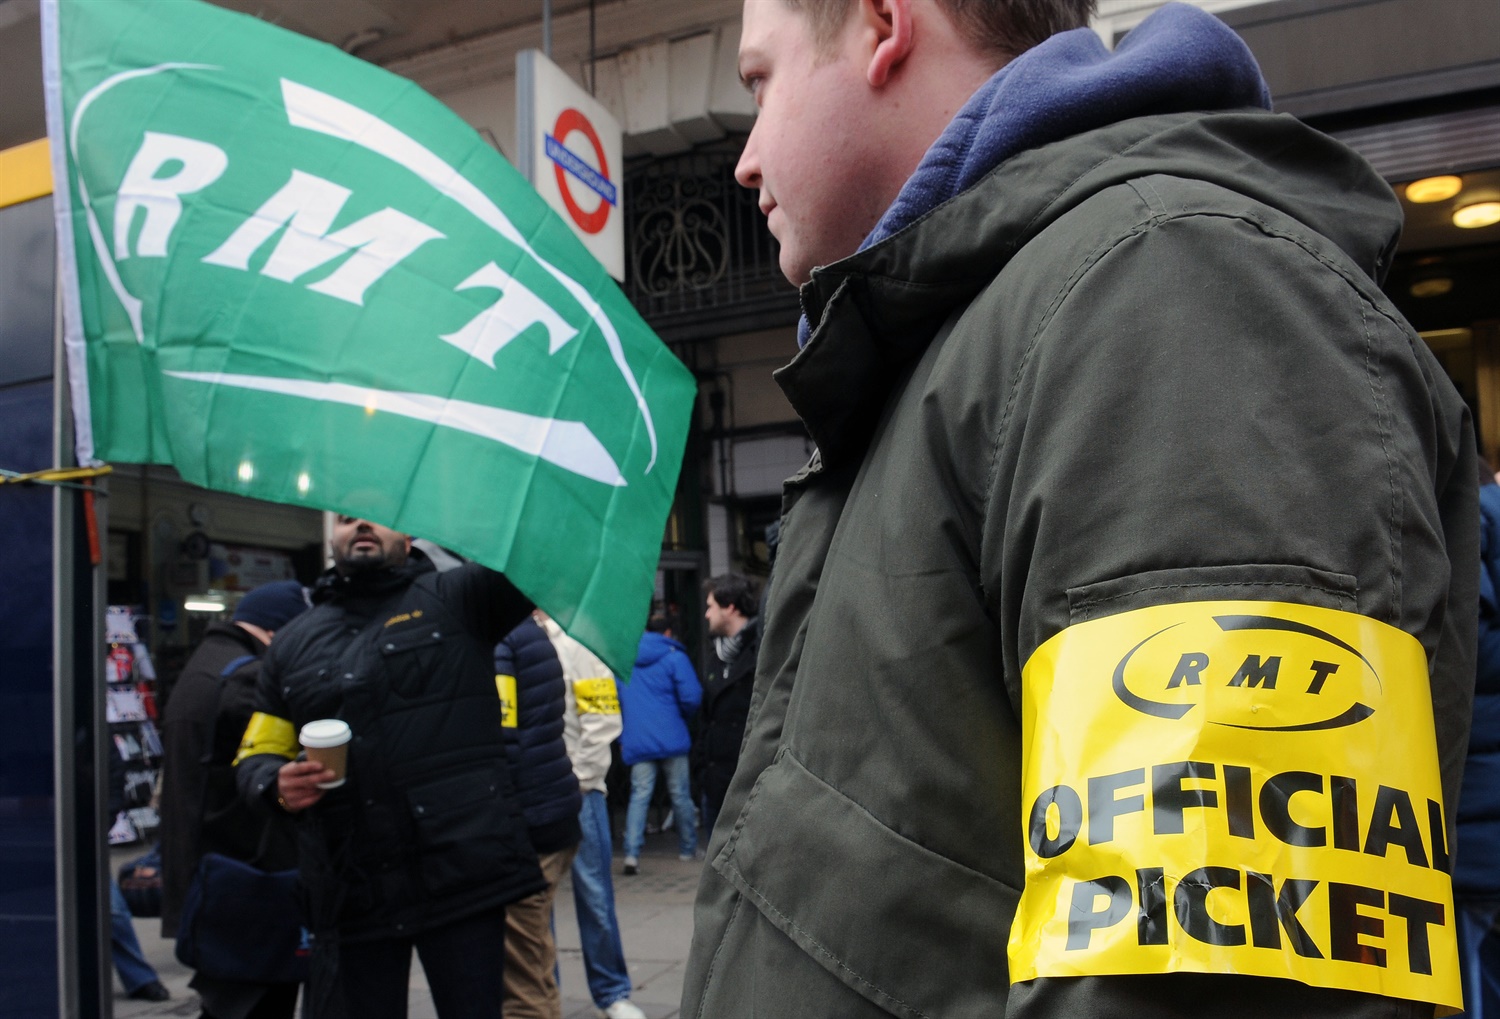 National rail strike moves closer as unions reject revised pay offer